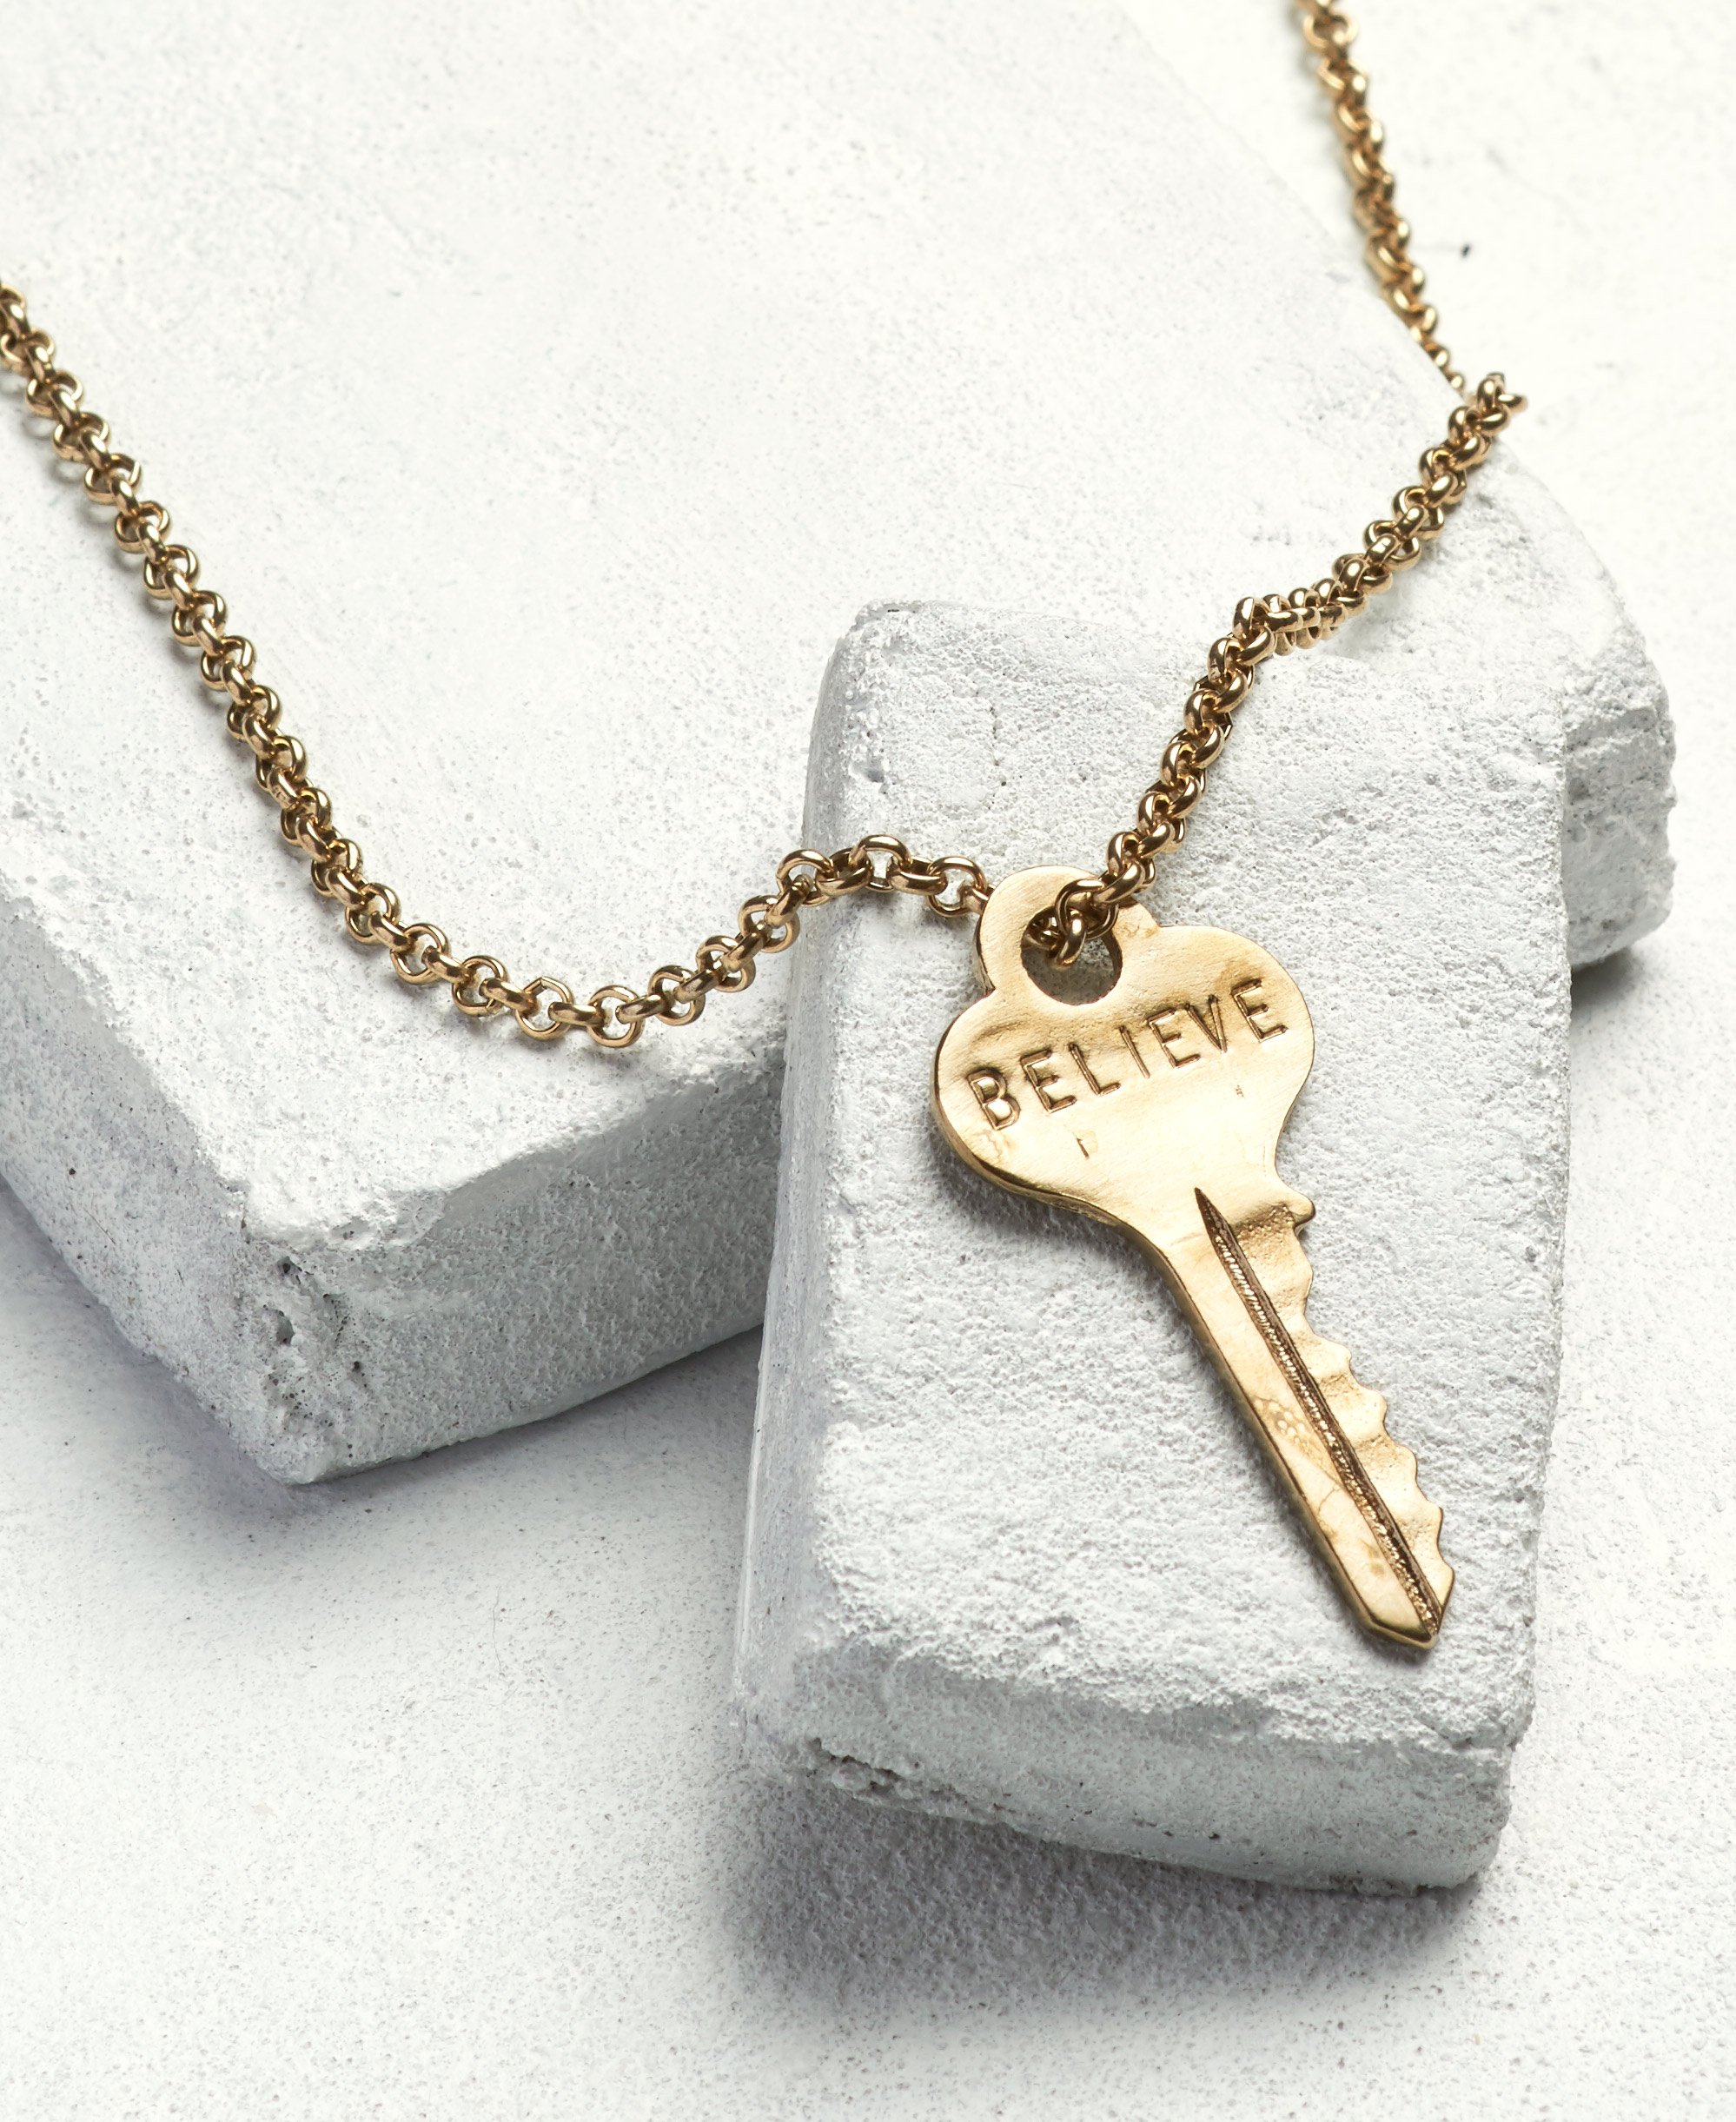 Classic Key Necklace – The Giving Keys